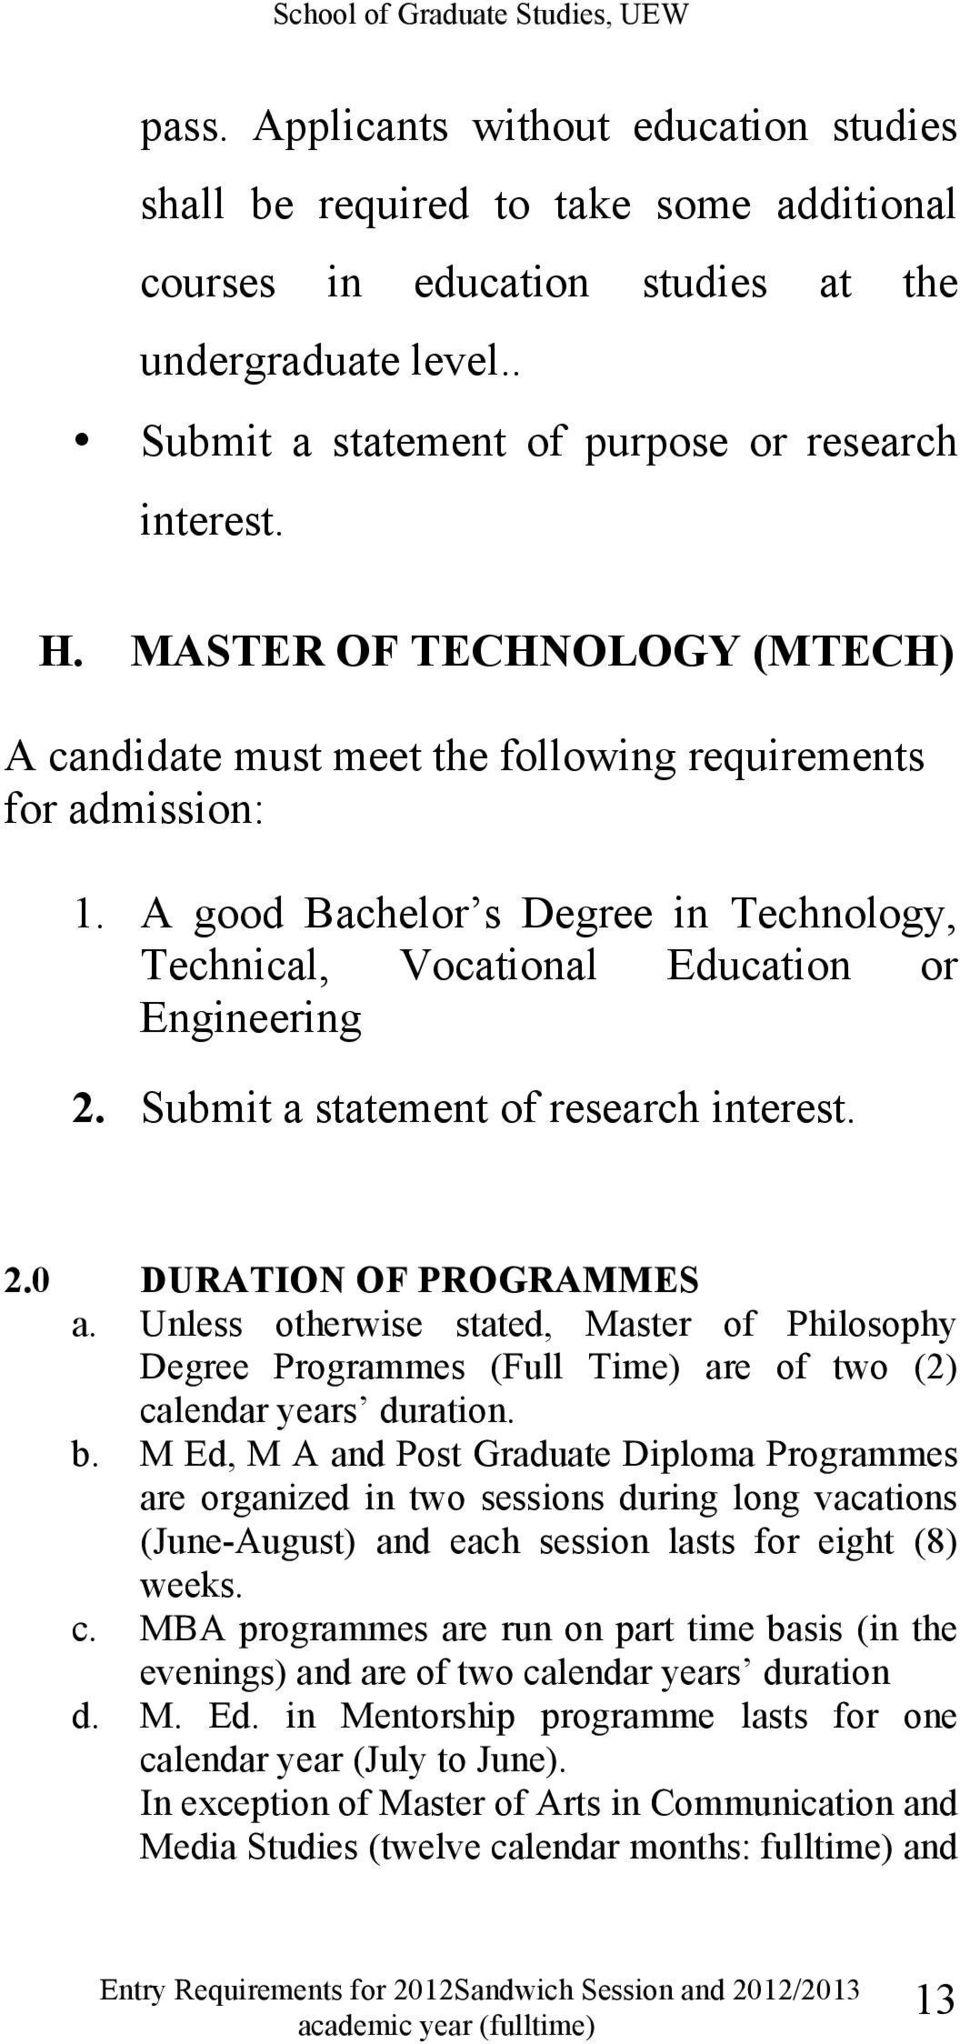 Submit a statement of research interest. 2.0 DURATION OF PROGRAMMES a. Unless otherwise stated, Master of Philosophy Degree Programmes (Full Time) are of two (2) calendar years duration. b.